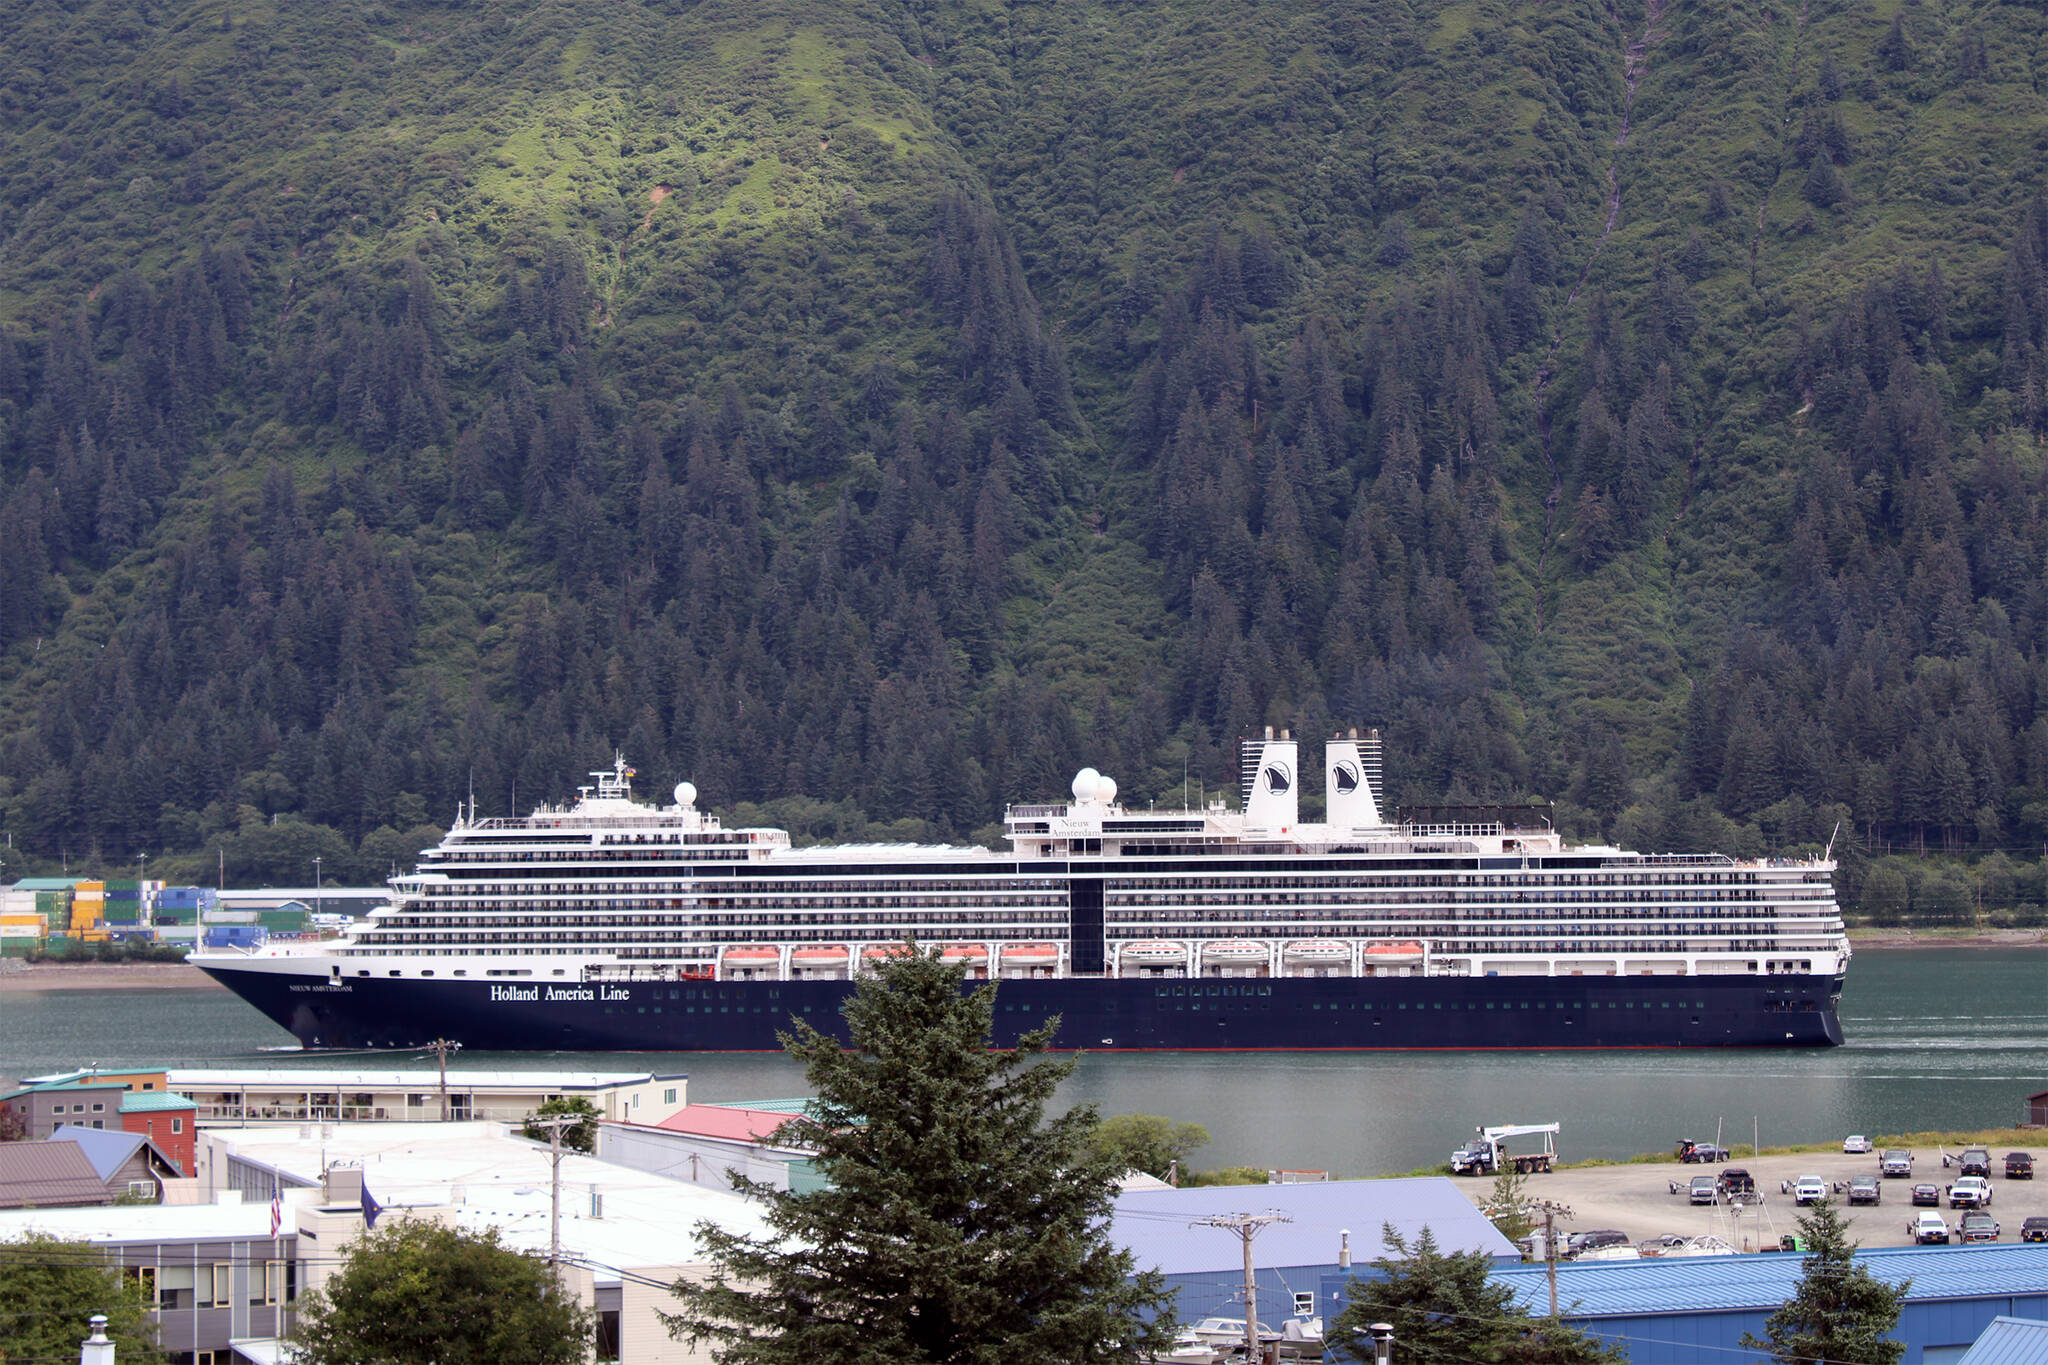 Dana Zigmund / Juneau Empire 
The Nieuw Amsterdam sails into Juneau on July 26, 2021. On Monday night, city leaders reviewed the results of a community survey aimed at learning more about community attitudes about the impact of large cruise ships.